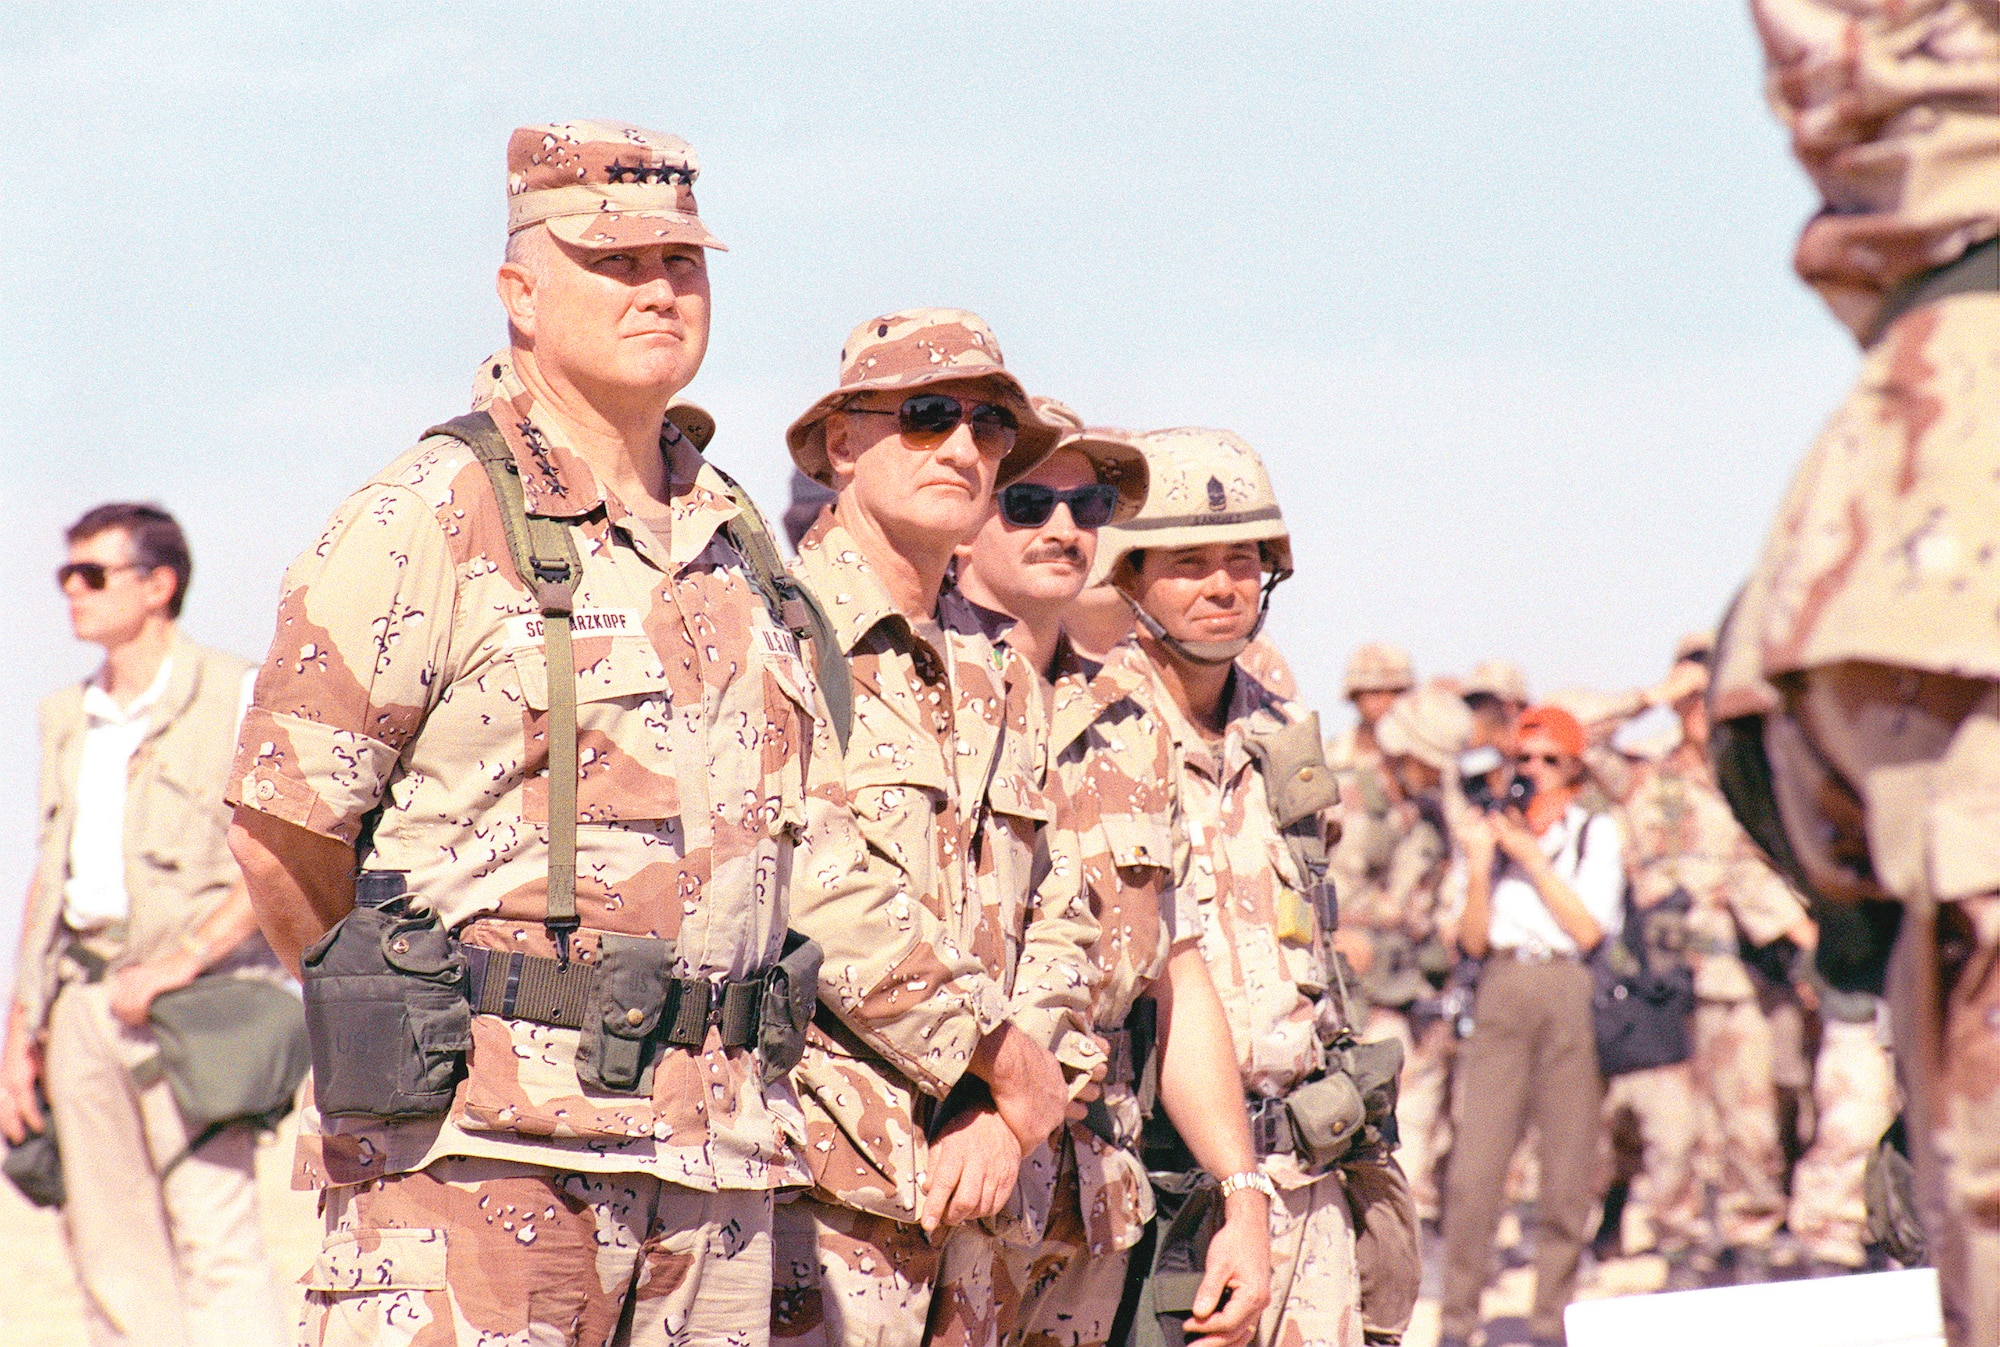 U.S. Army Gen. H. Norman Schwarzkopf (left), U.S. Central Command commander in chief, inspects troops while visiting a base camp during Operation Desert Storm in Saudi Arabia, April 5, 1991. (Courtesy Photo)